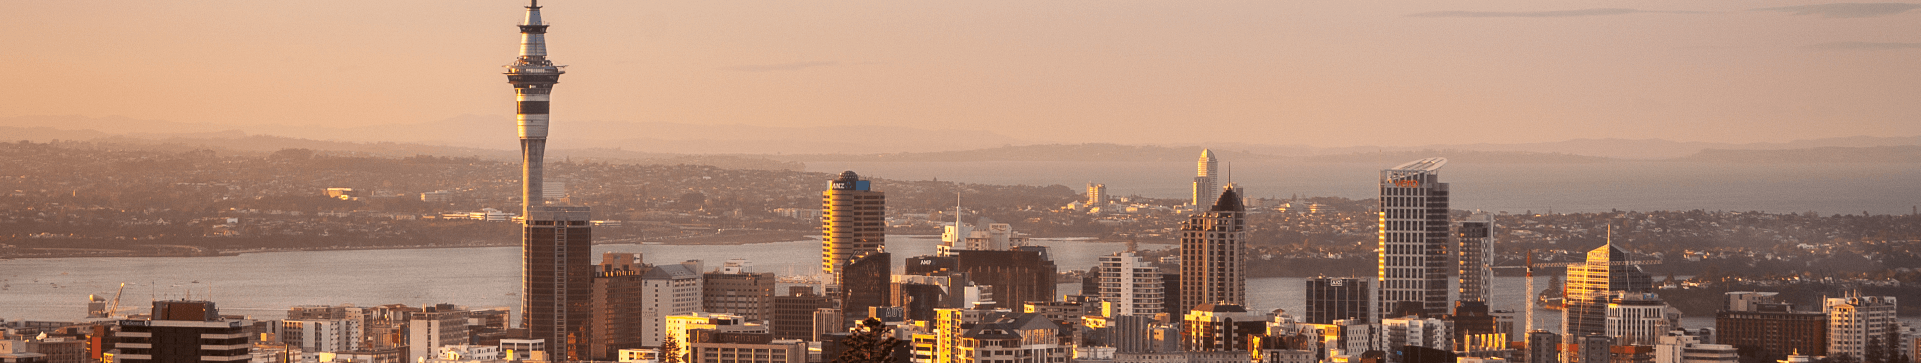 Auckland City view from Mount Eden